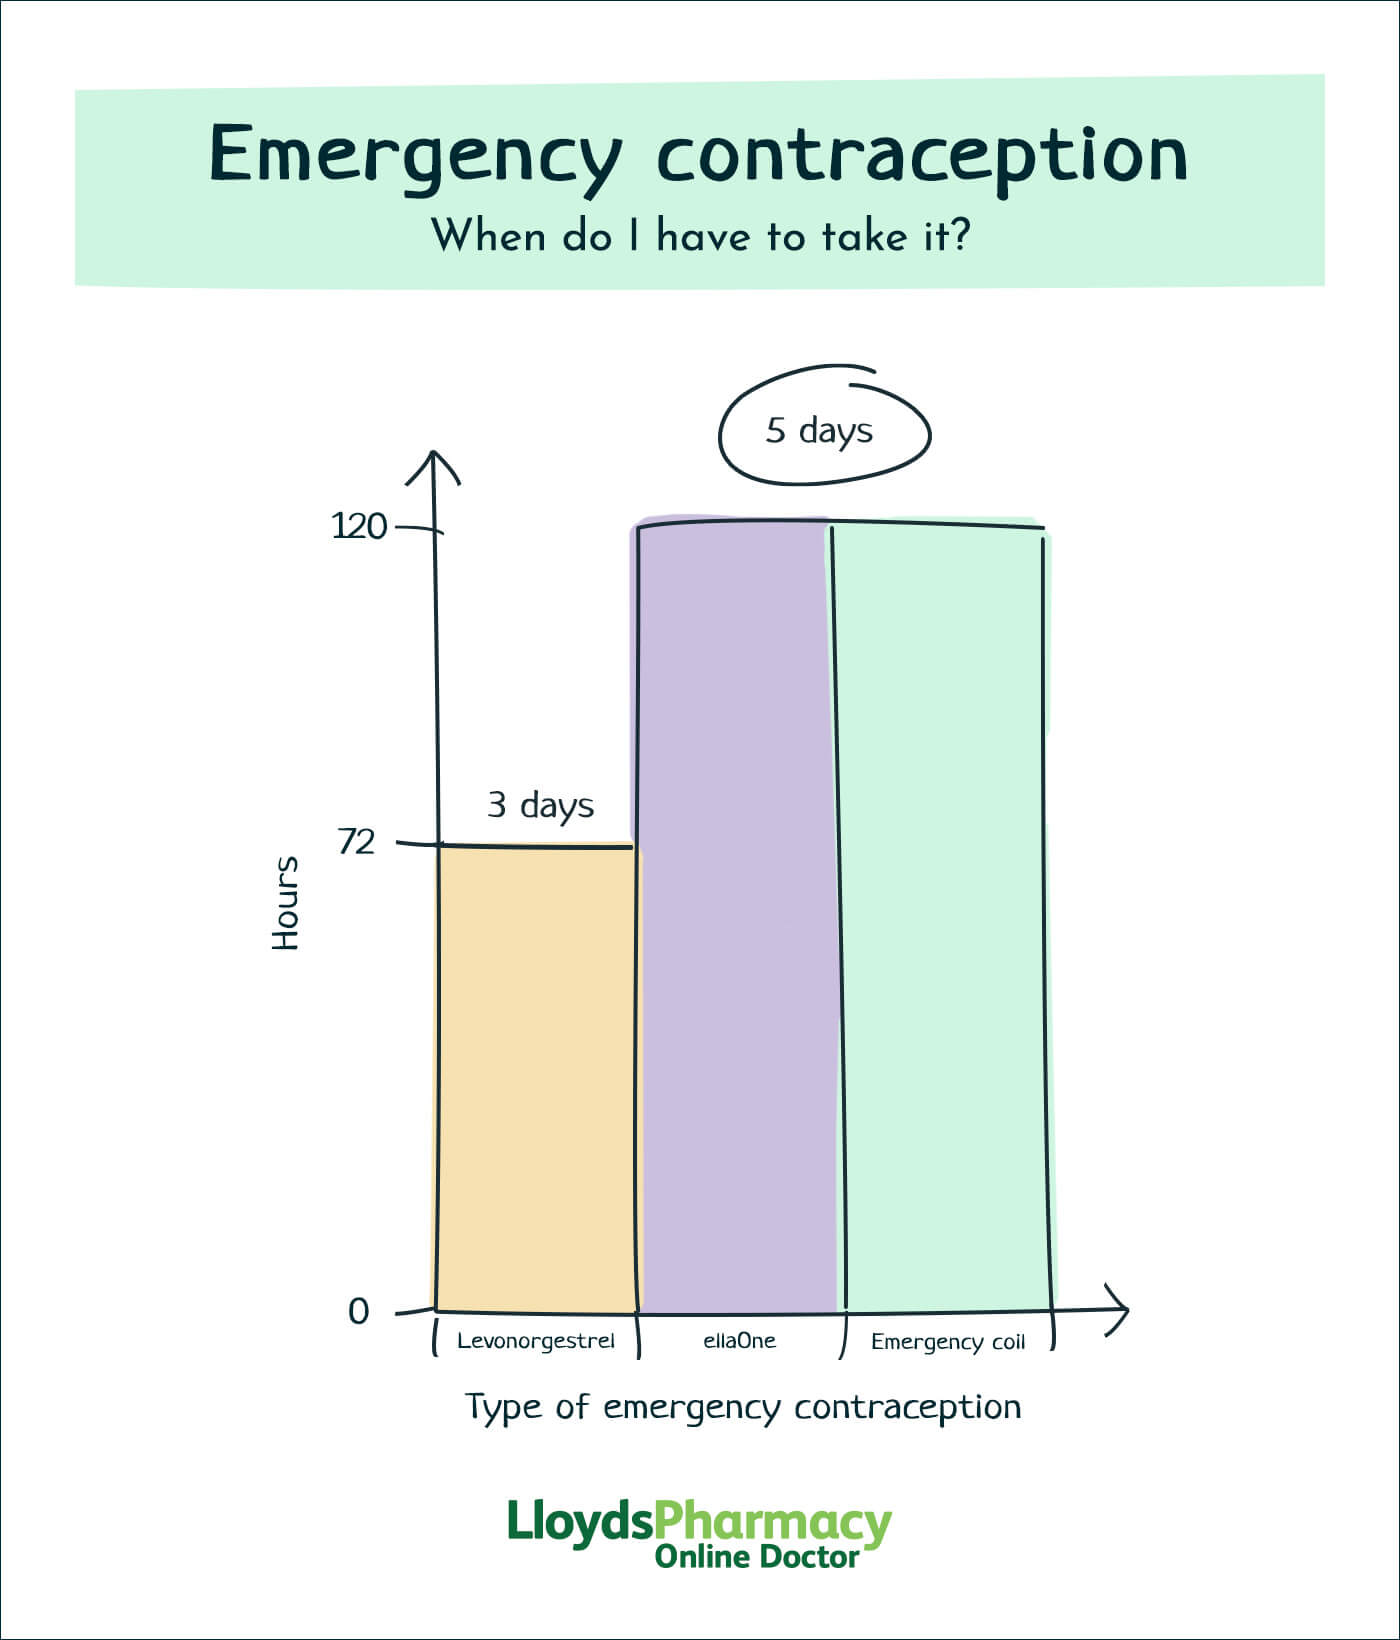 When to take emergency contraception